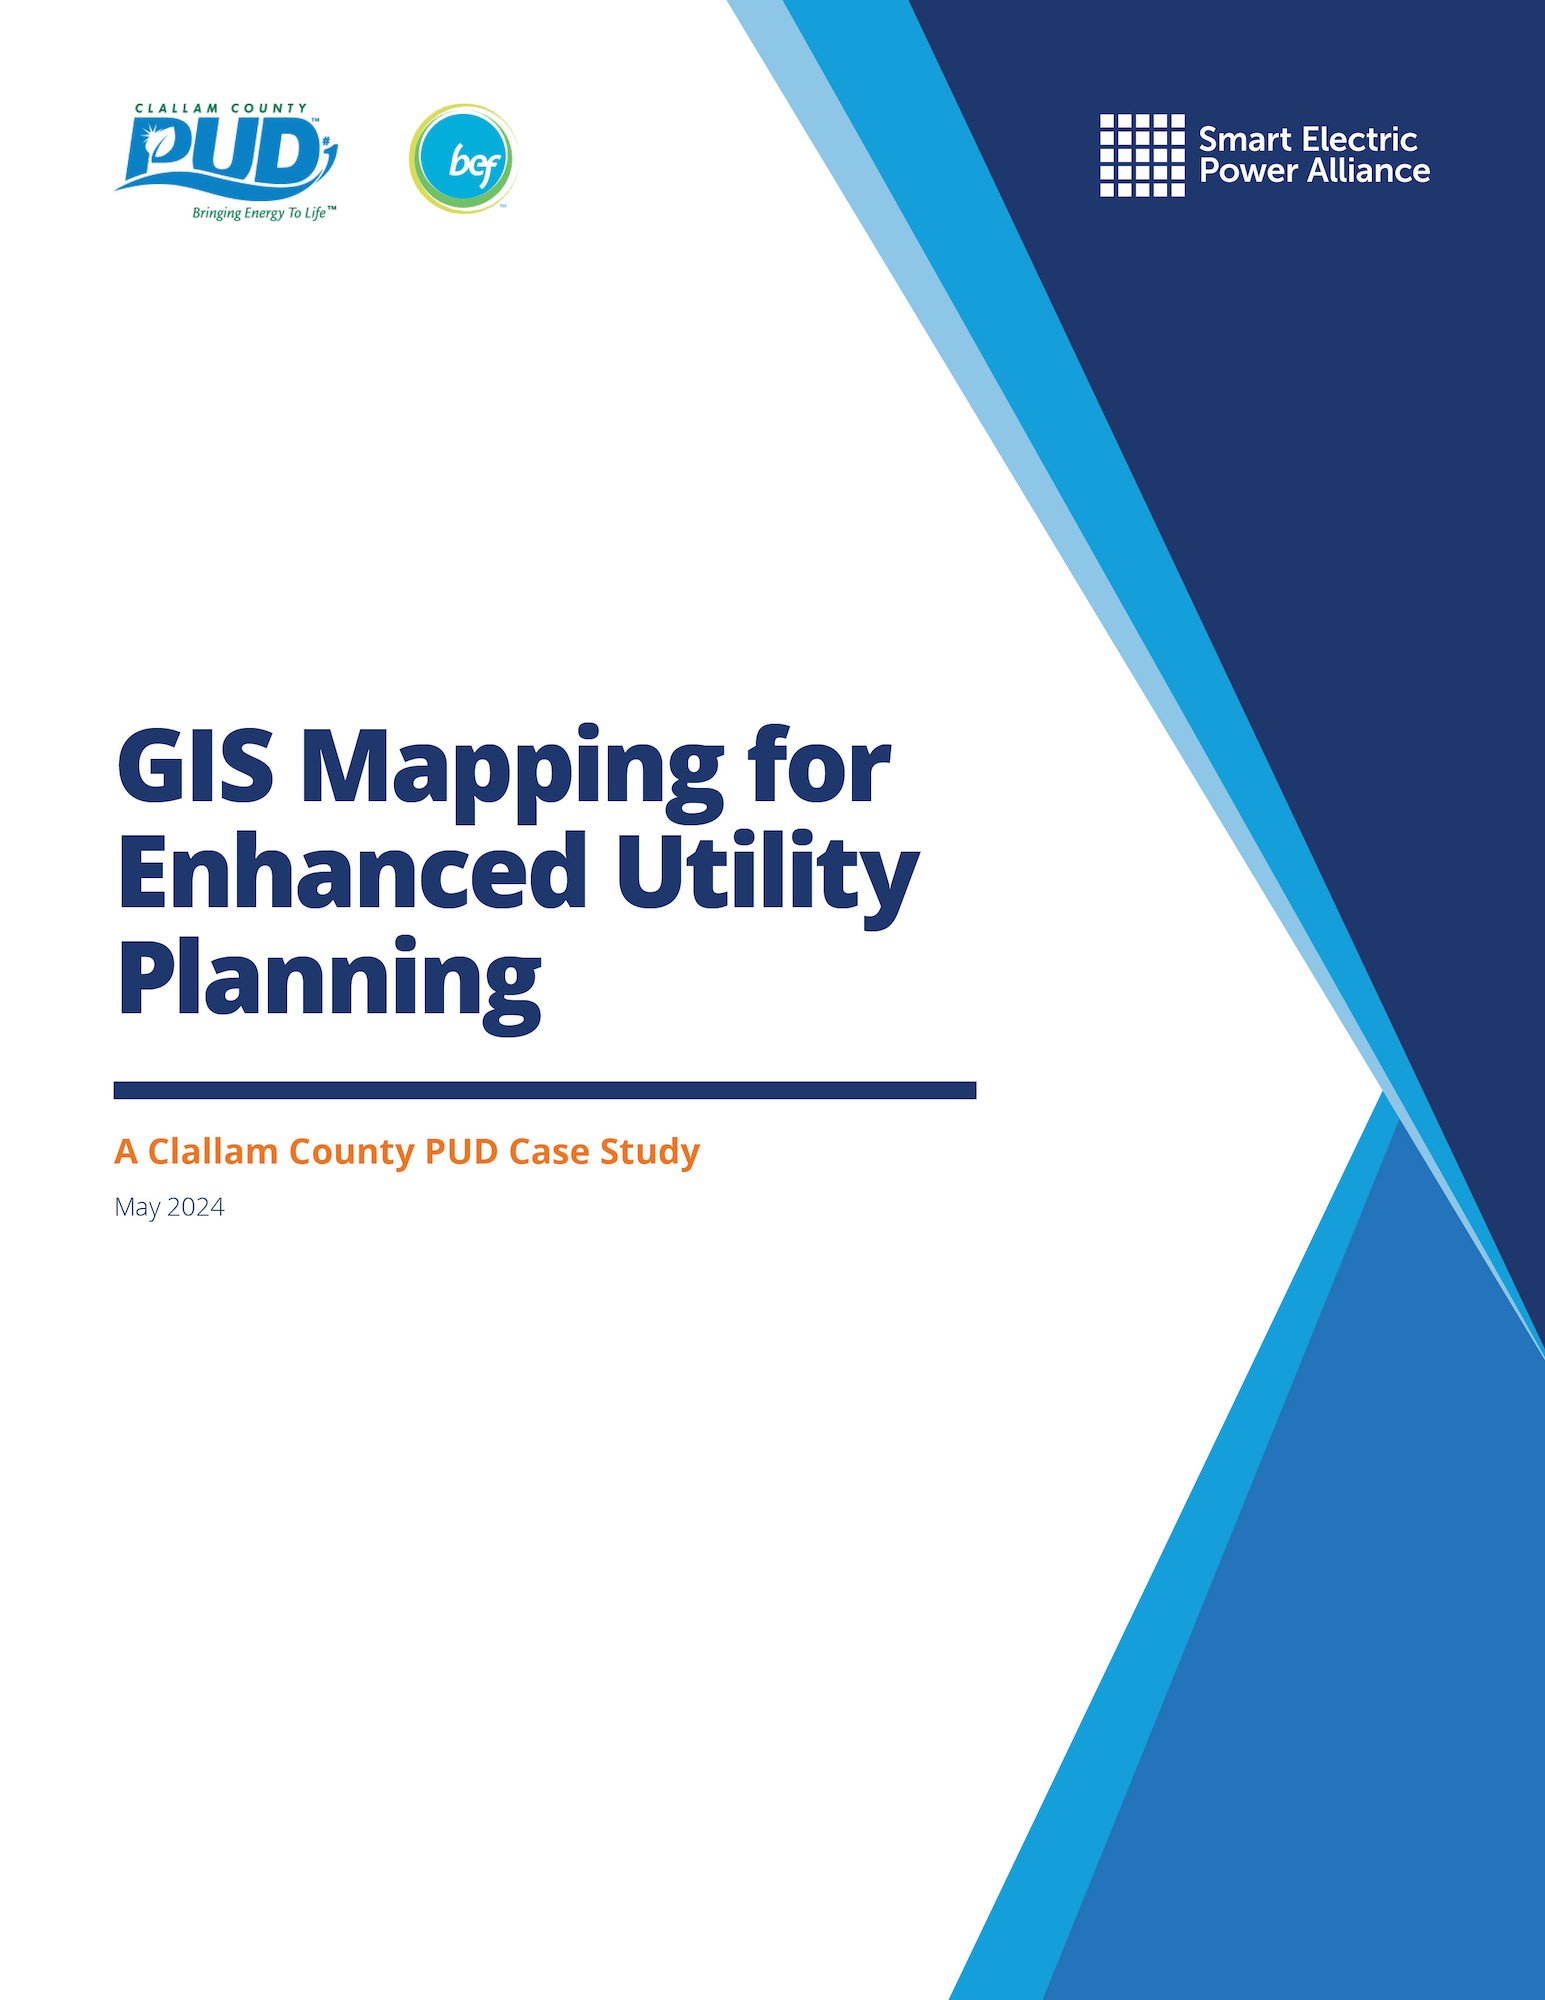 GIS Mapping for Enhanced Utility Planning